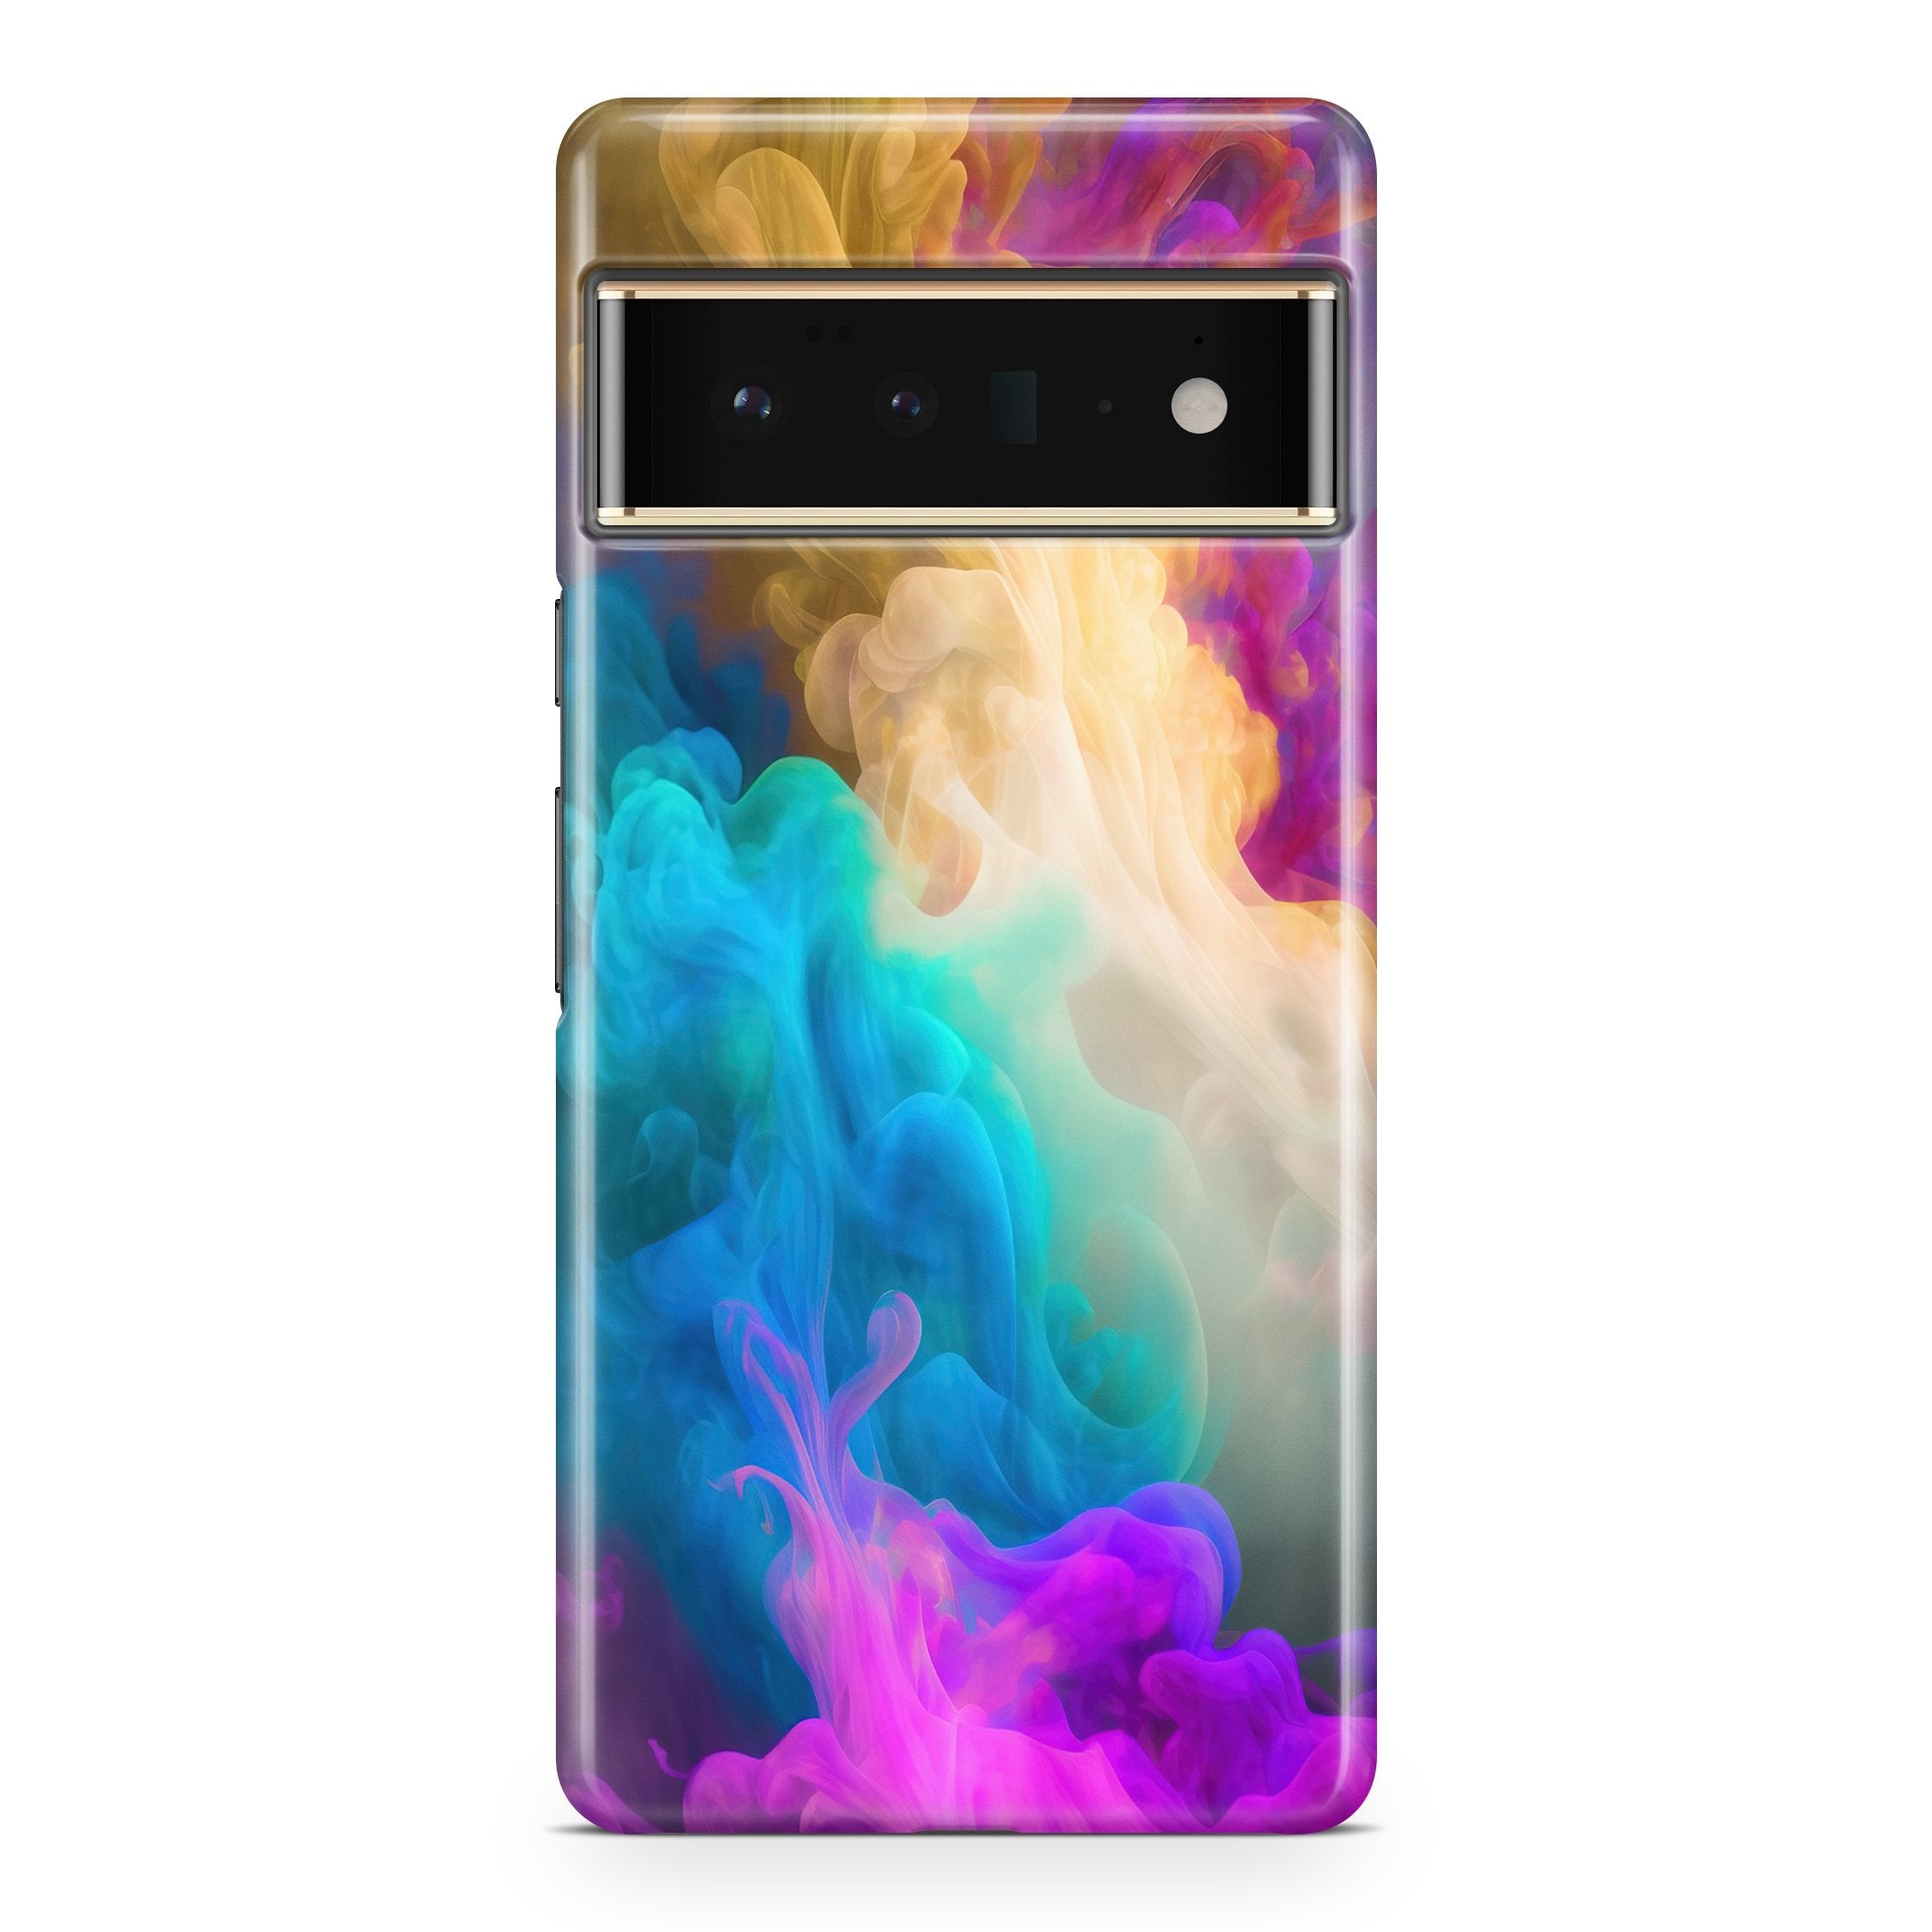 Prismatic Cloud - Google phone case designs by CaseSwagger